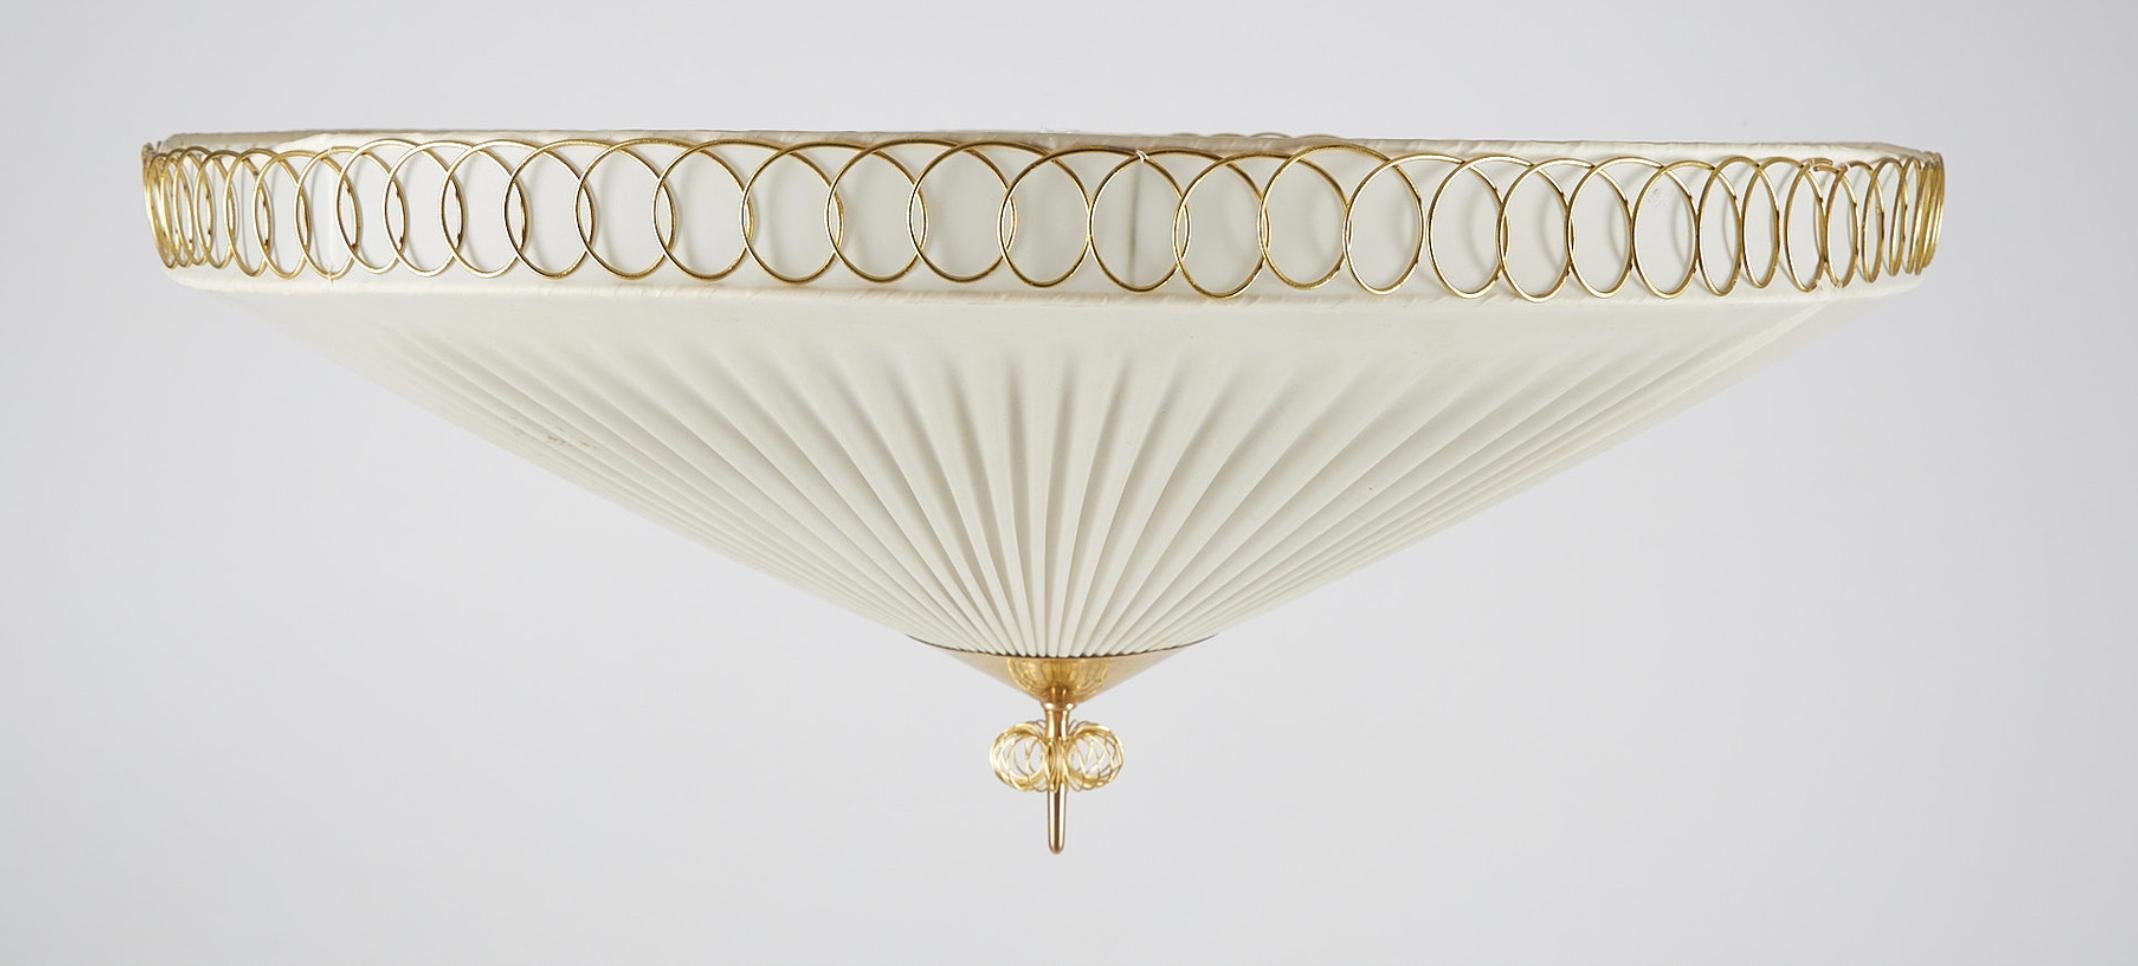 A ceiling light designed by Paavo Tynell, produced by Idman Oy, Model K5-27. Finland , circa 1950th.

Polished brass and pleated plastic lampshade. Two lighting sockets.. Diameter 27.6″, height about 12″.

Existing wires, rewiring available upon